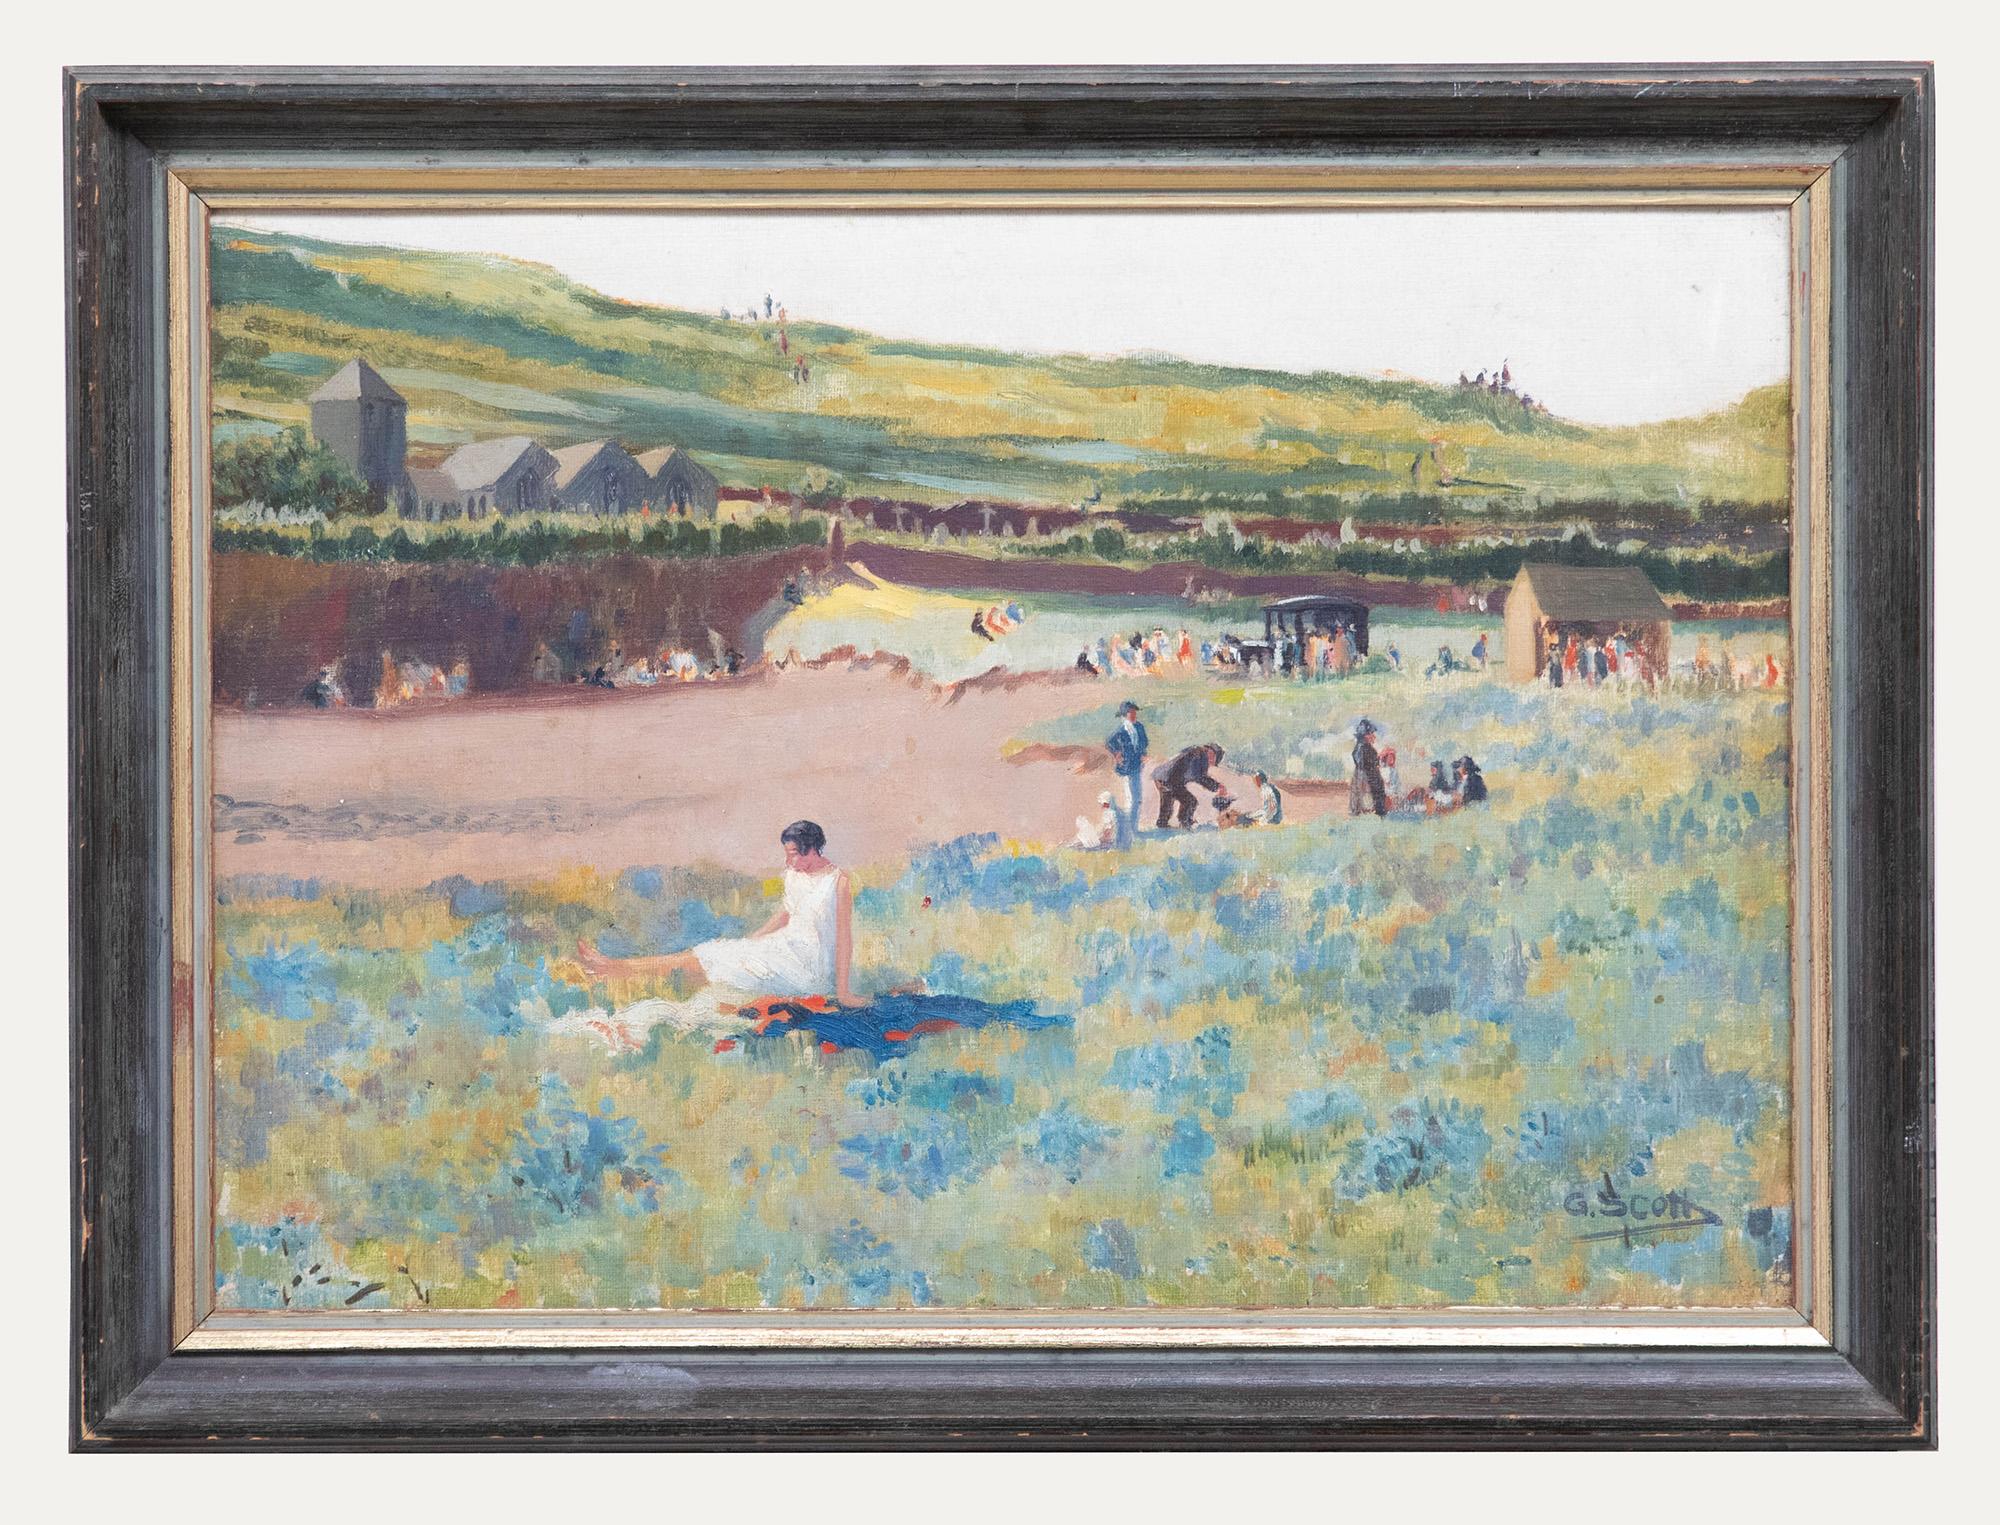 Unknown Landscape Painting - George Scott - Framed 20th Century Oil, Midday Sun